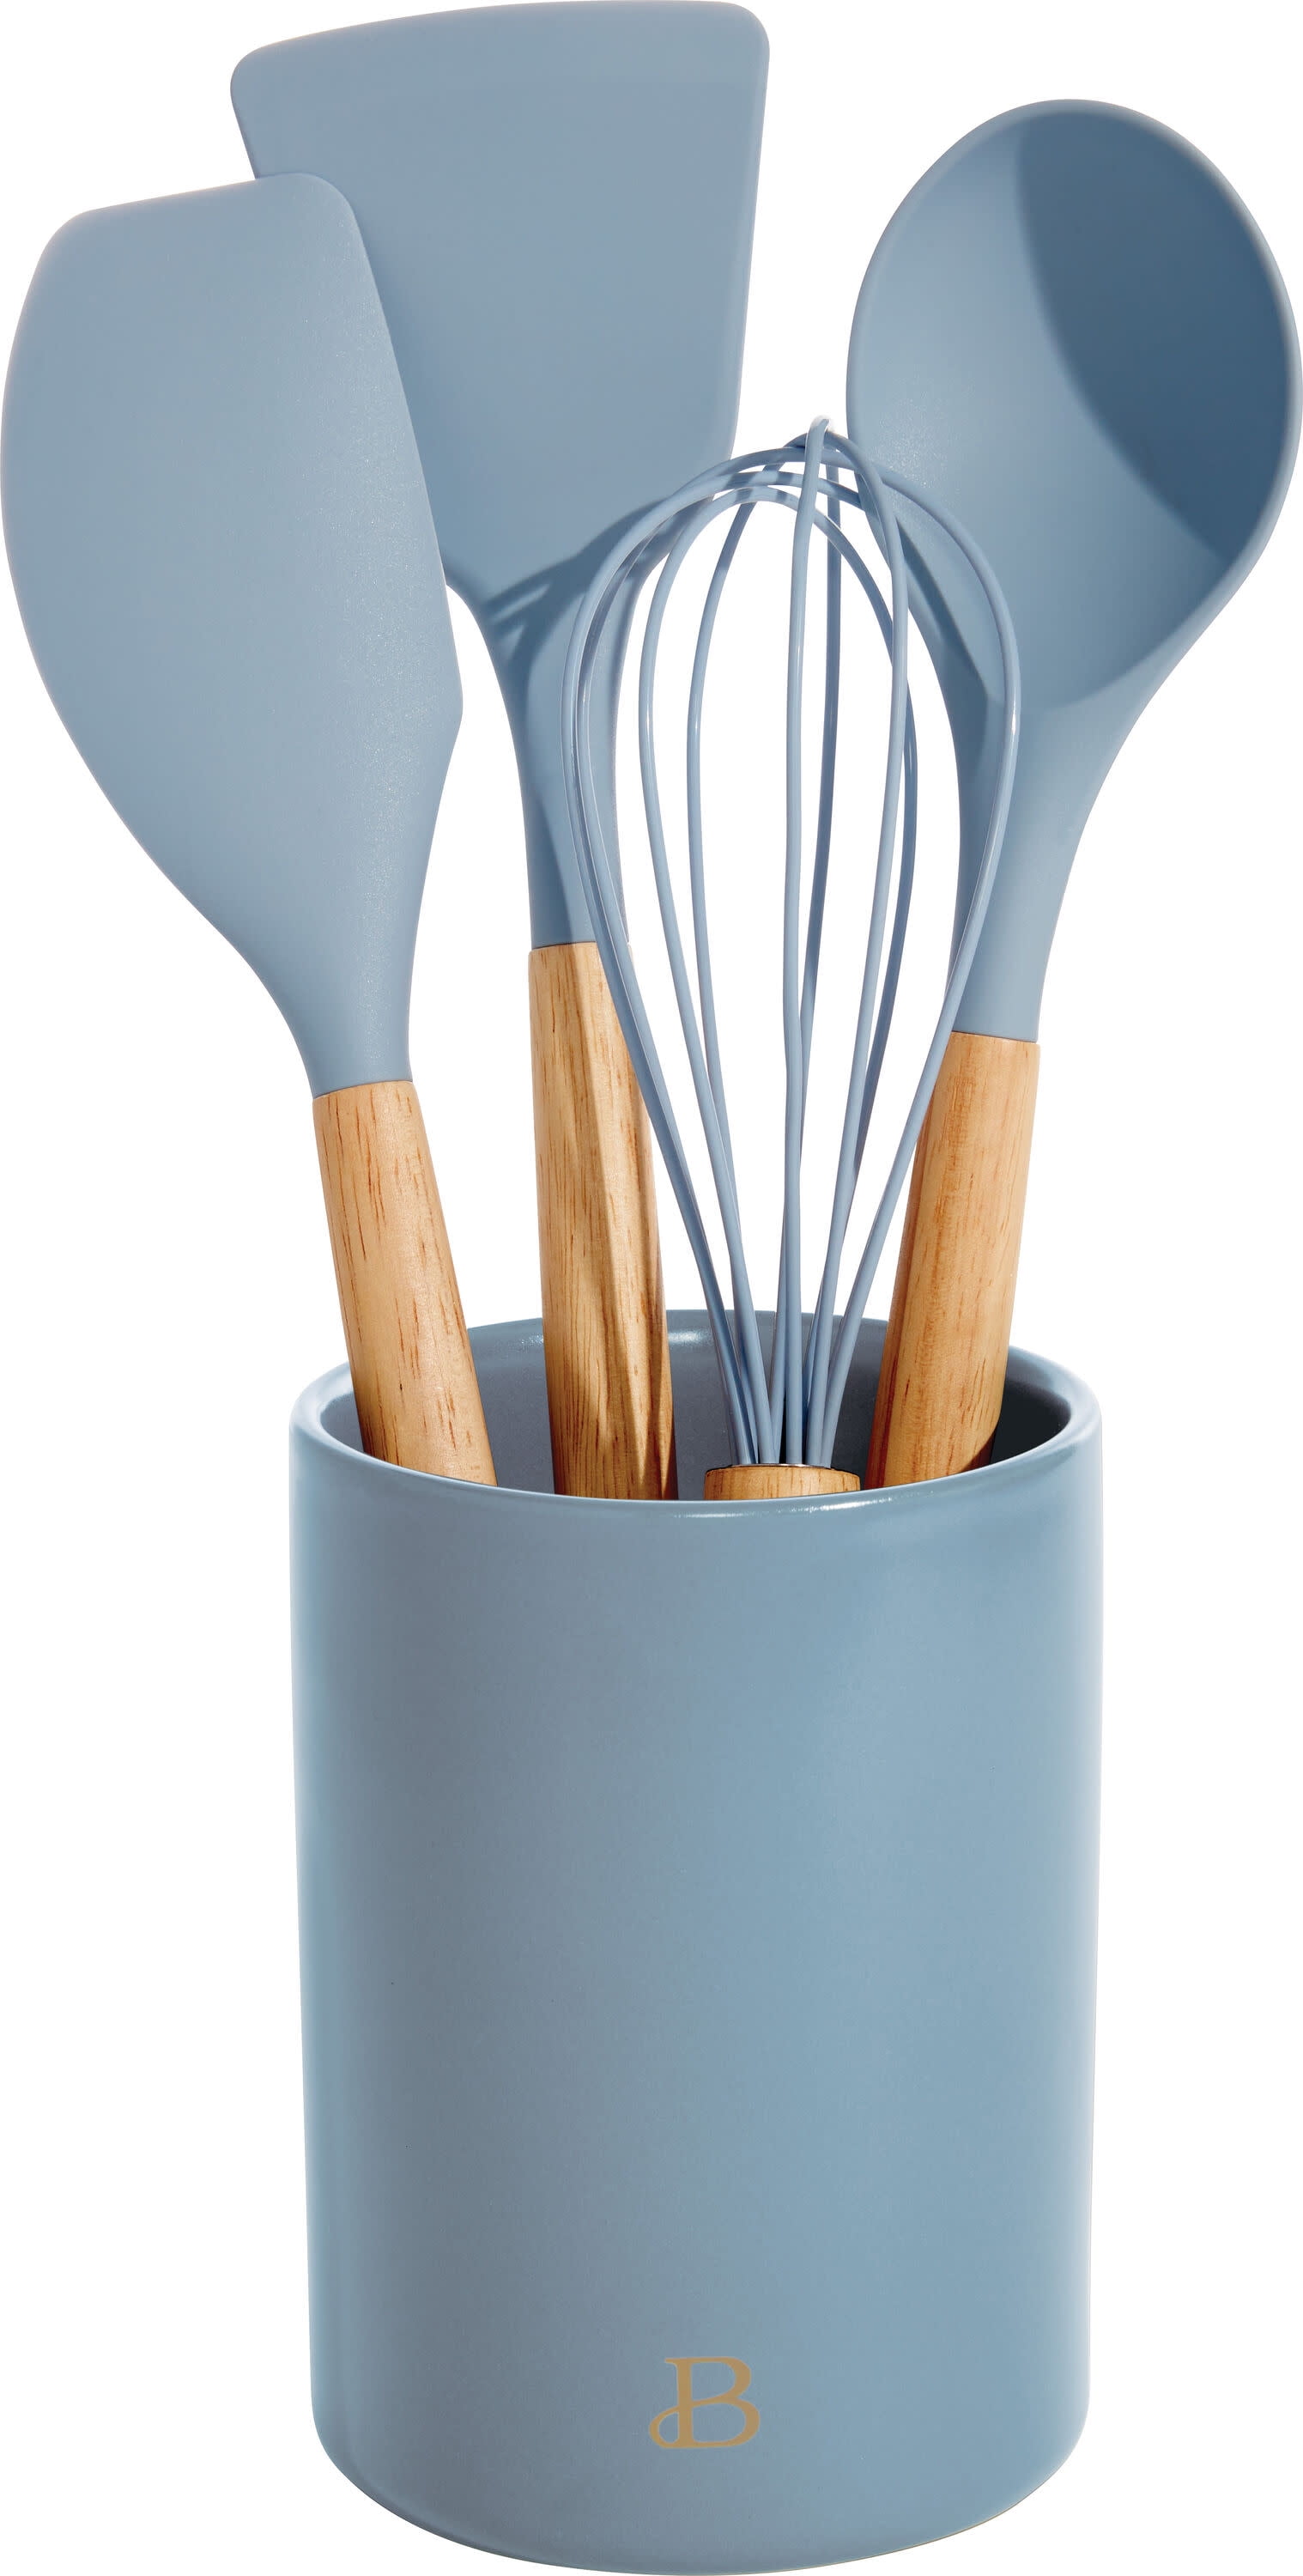 The 13 Best Kitchen Utensils: Wooden, Silicone and More